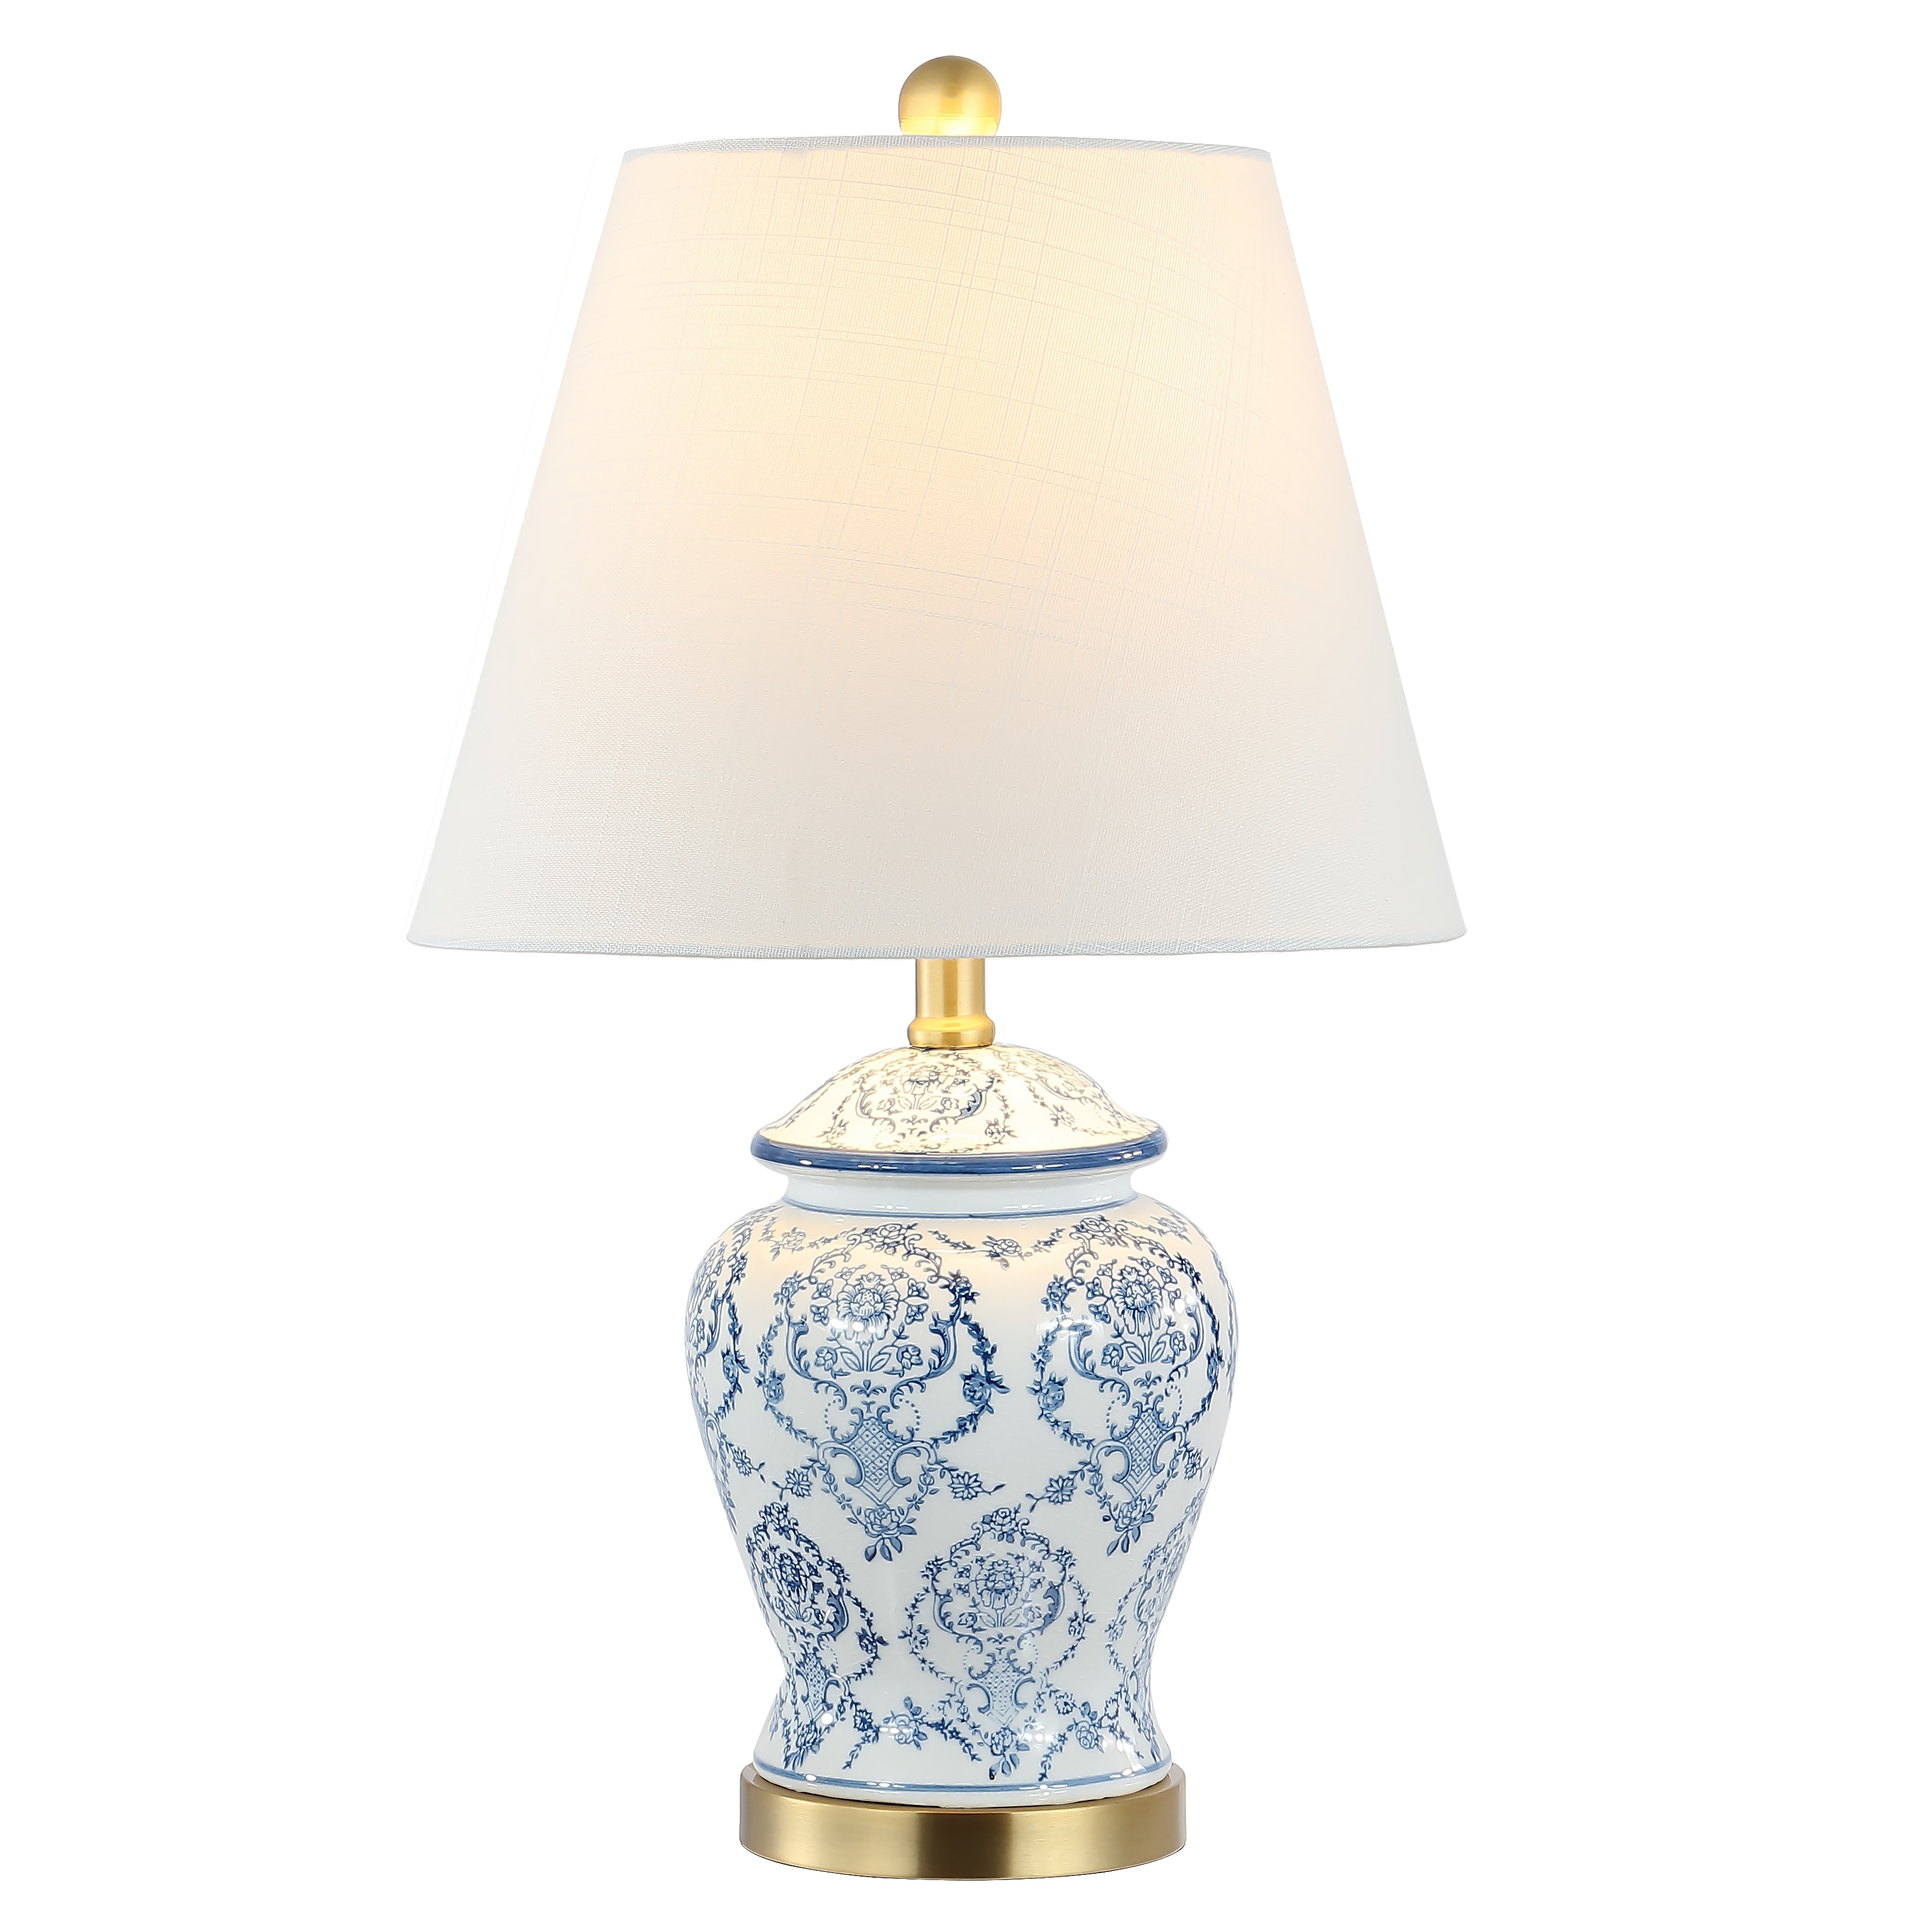 Billy Traditional Classic Chinoiserie Ceramic LED Table Lamp, Blue/White JONATHAN - 1 Bulb - Sale - Overstock - 35648136